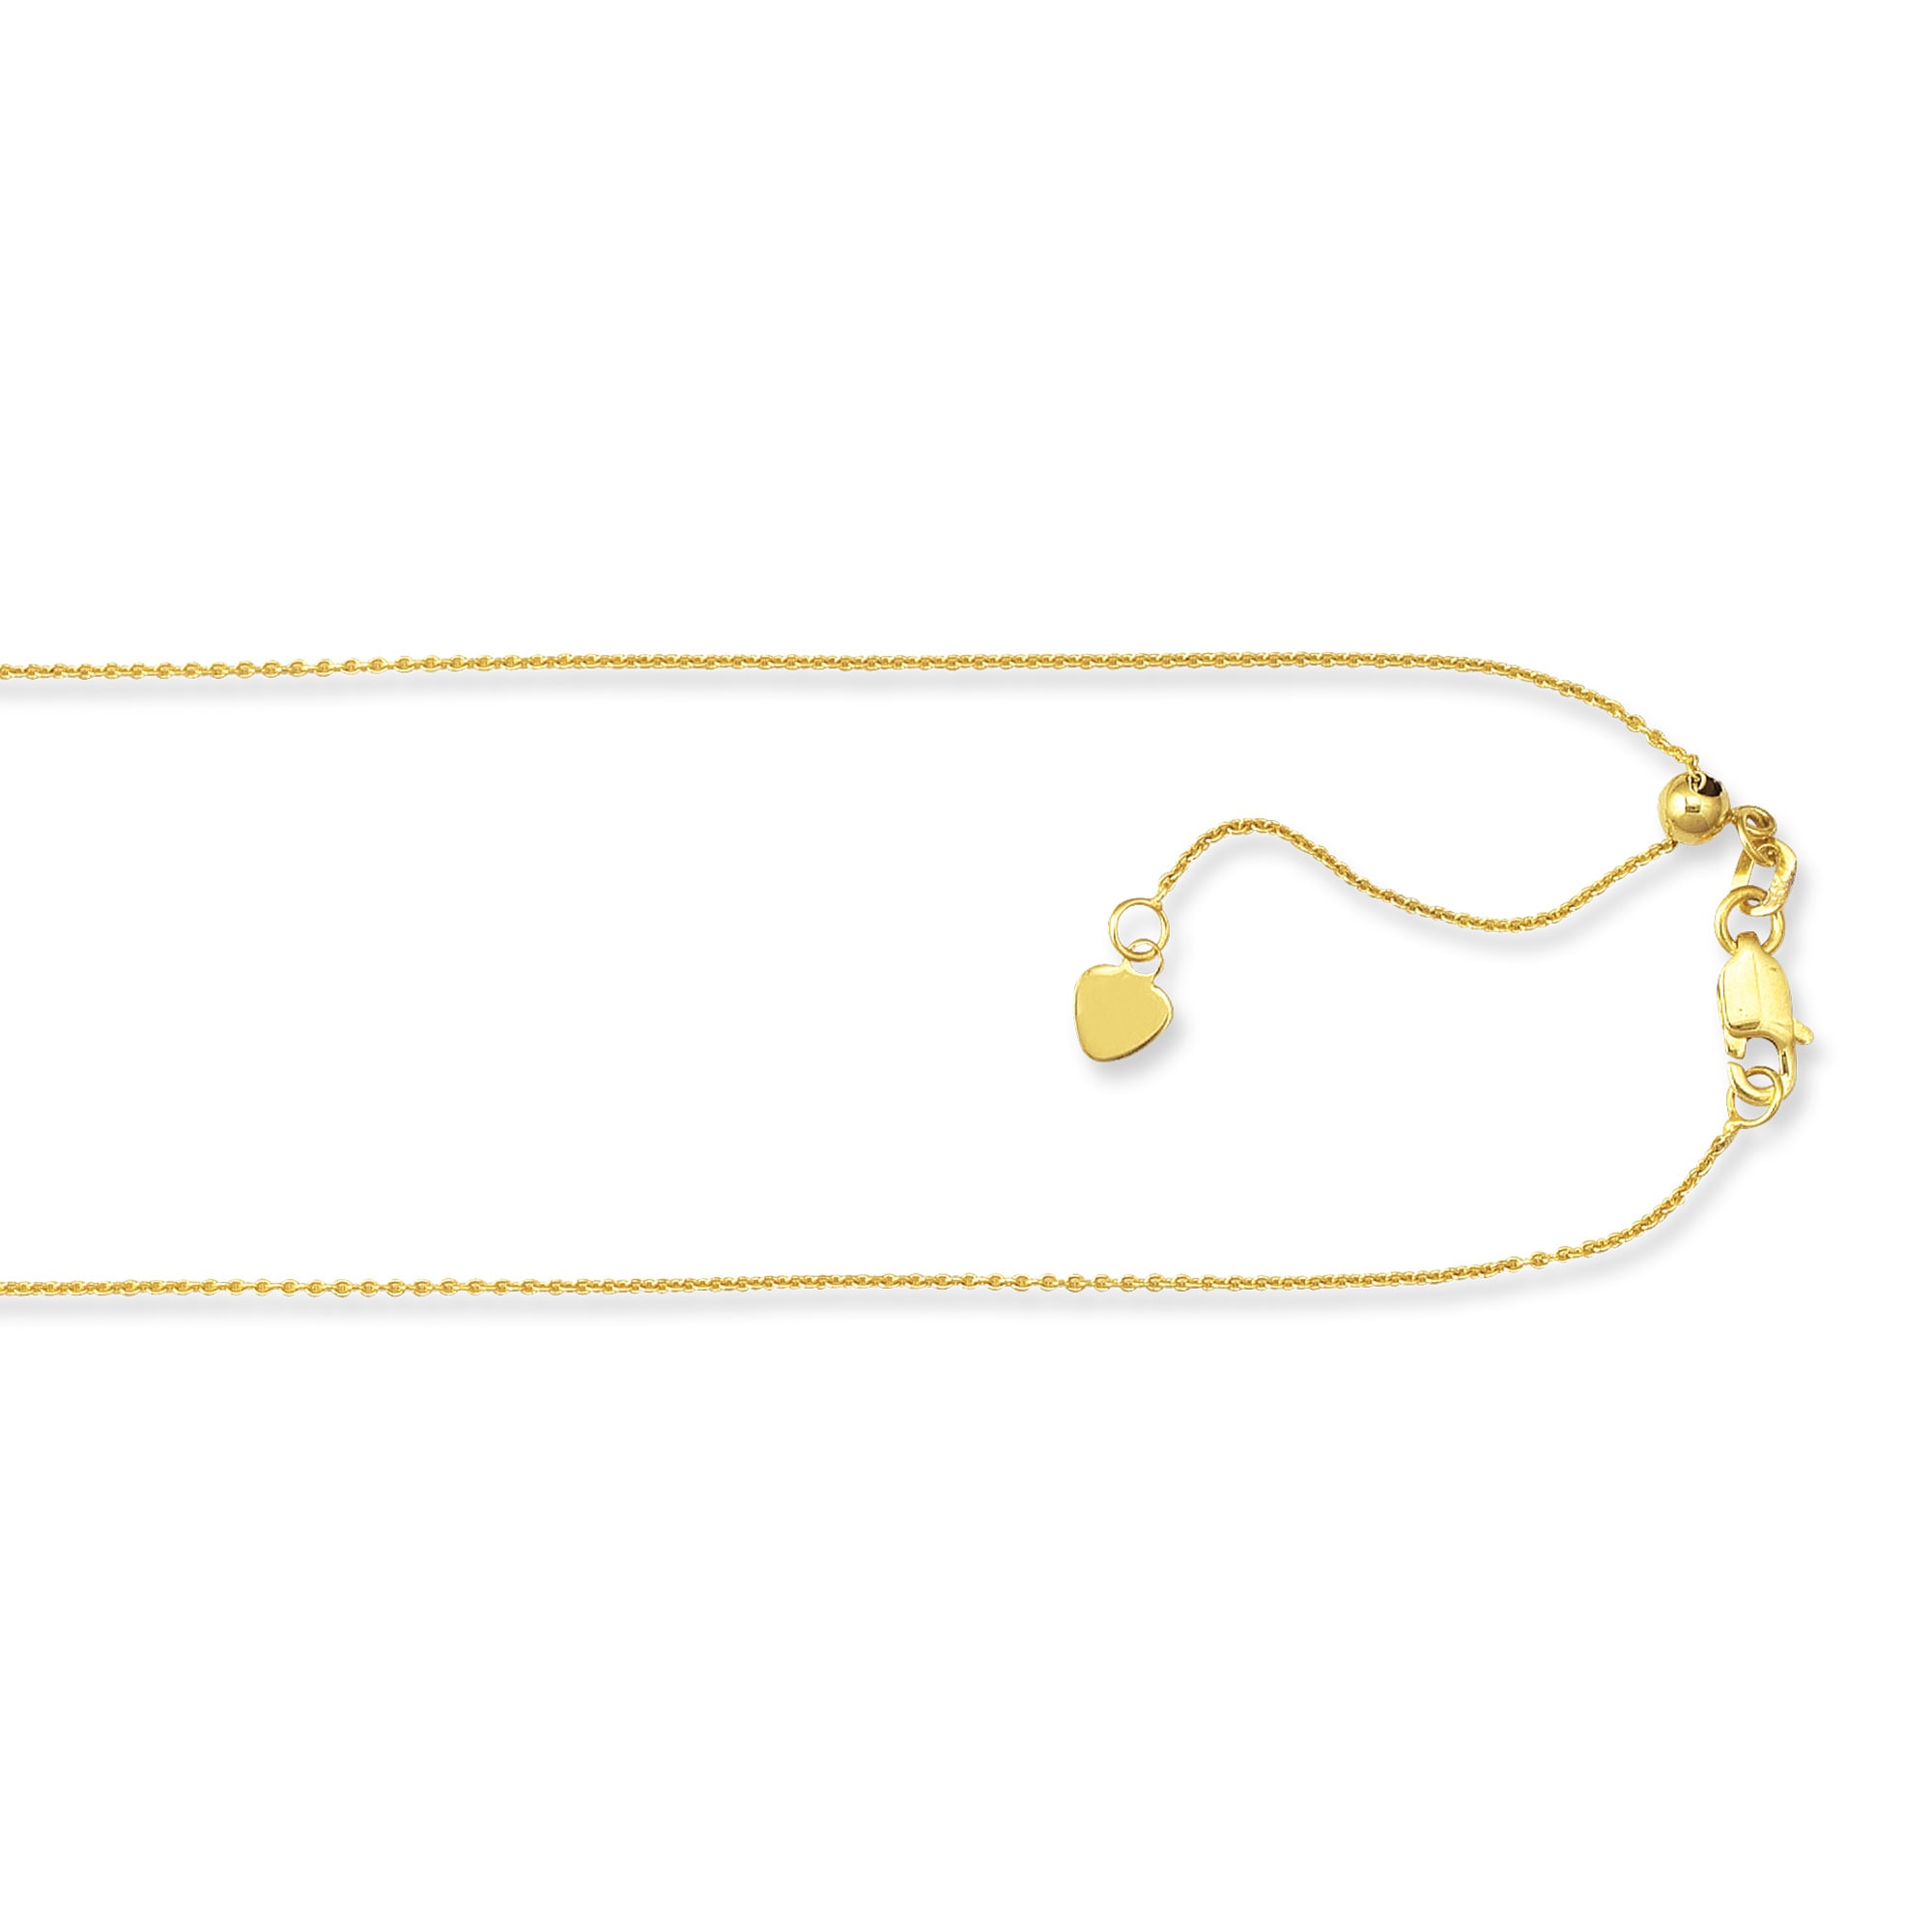 10K Gold 1.1mm Adjustable Cable Chain